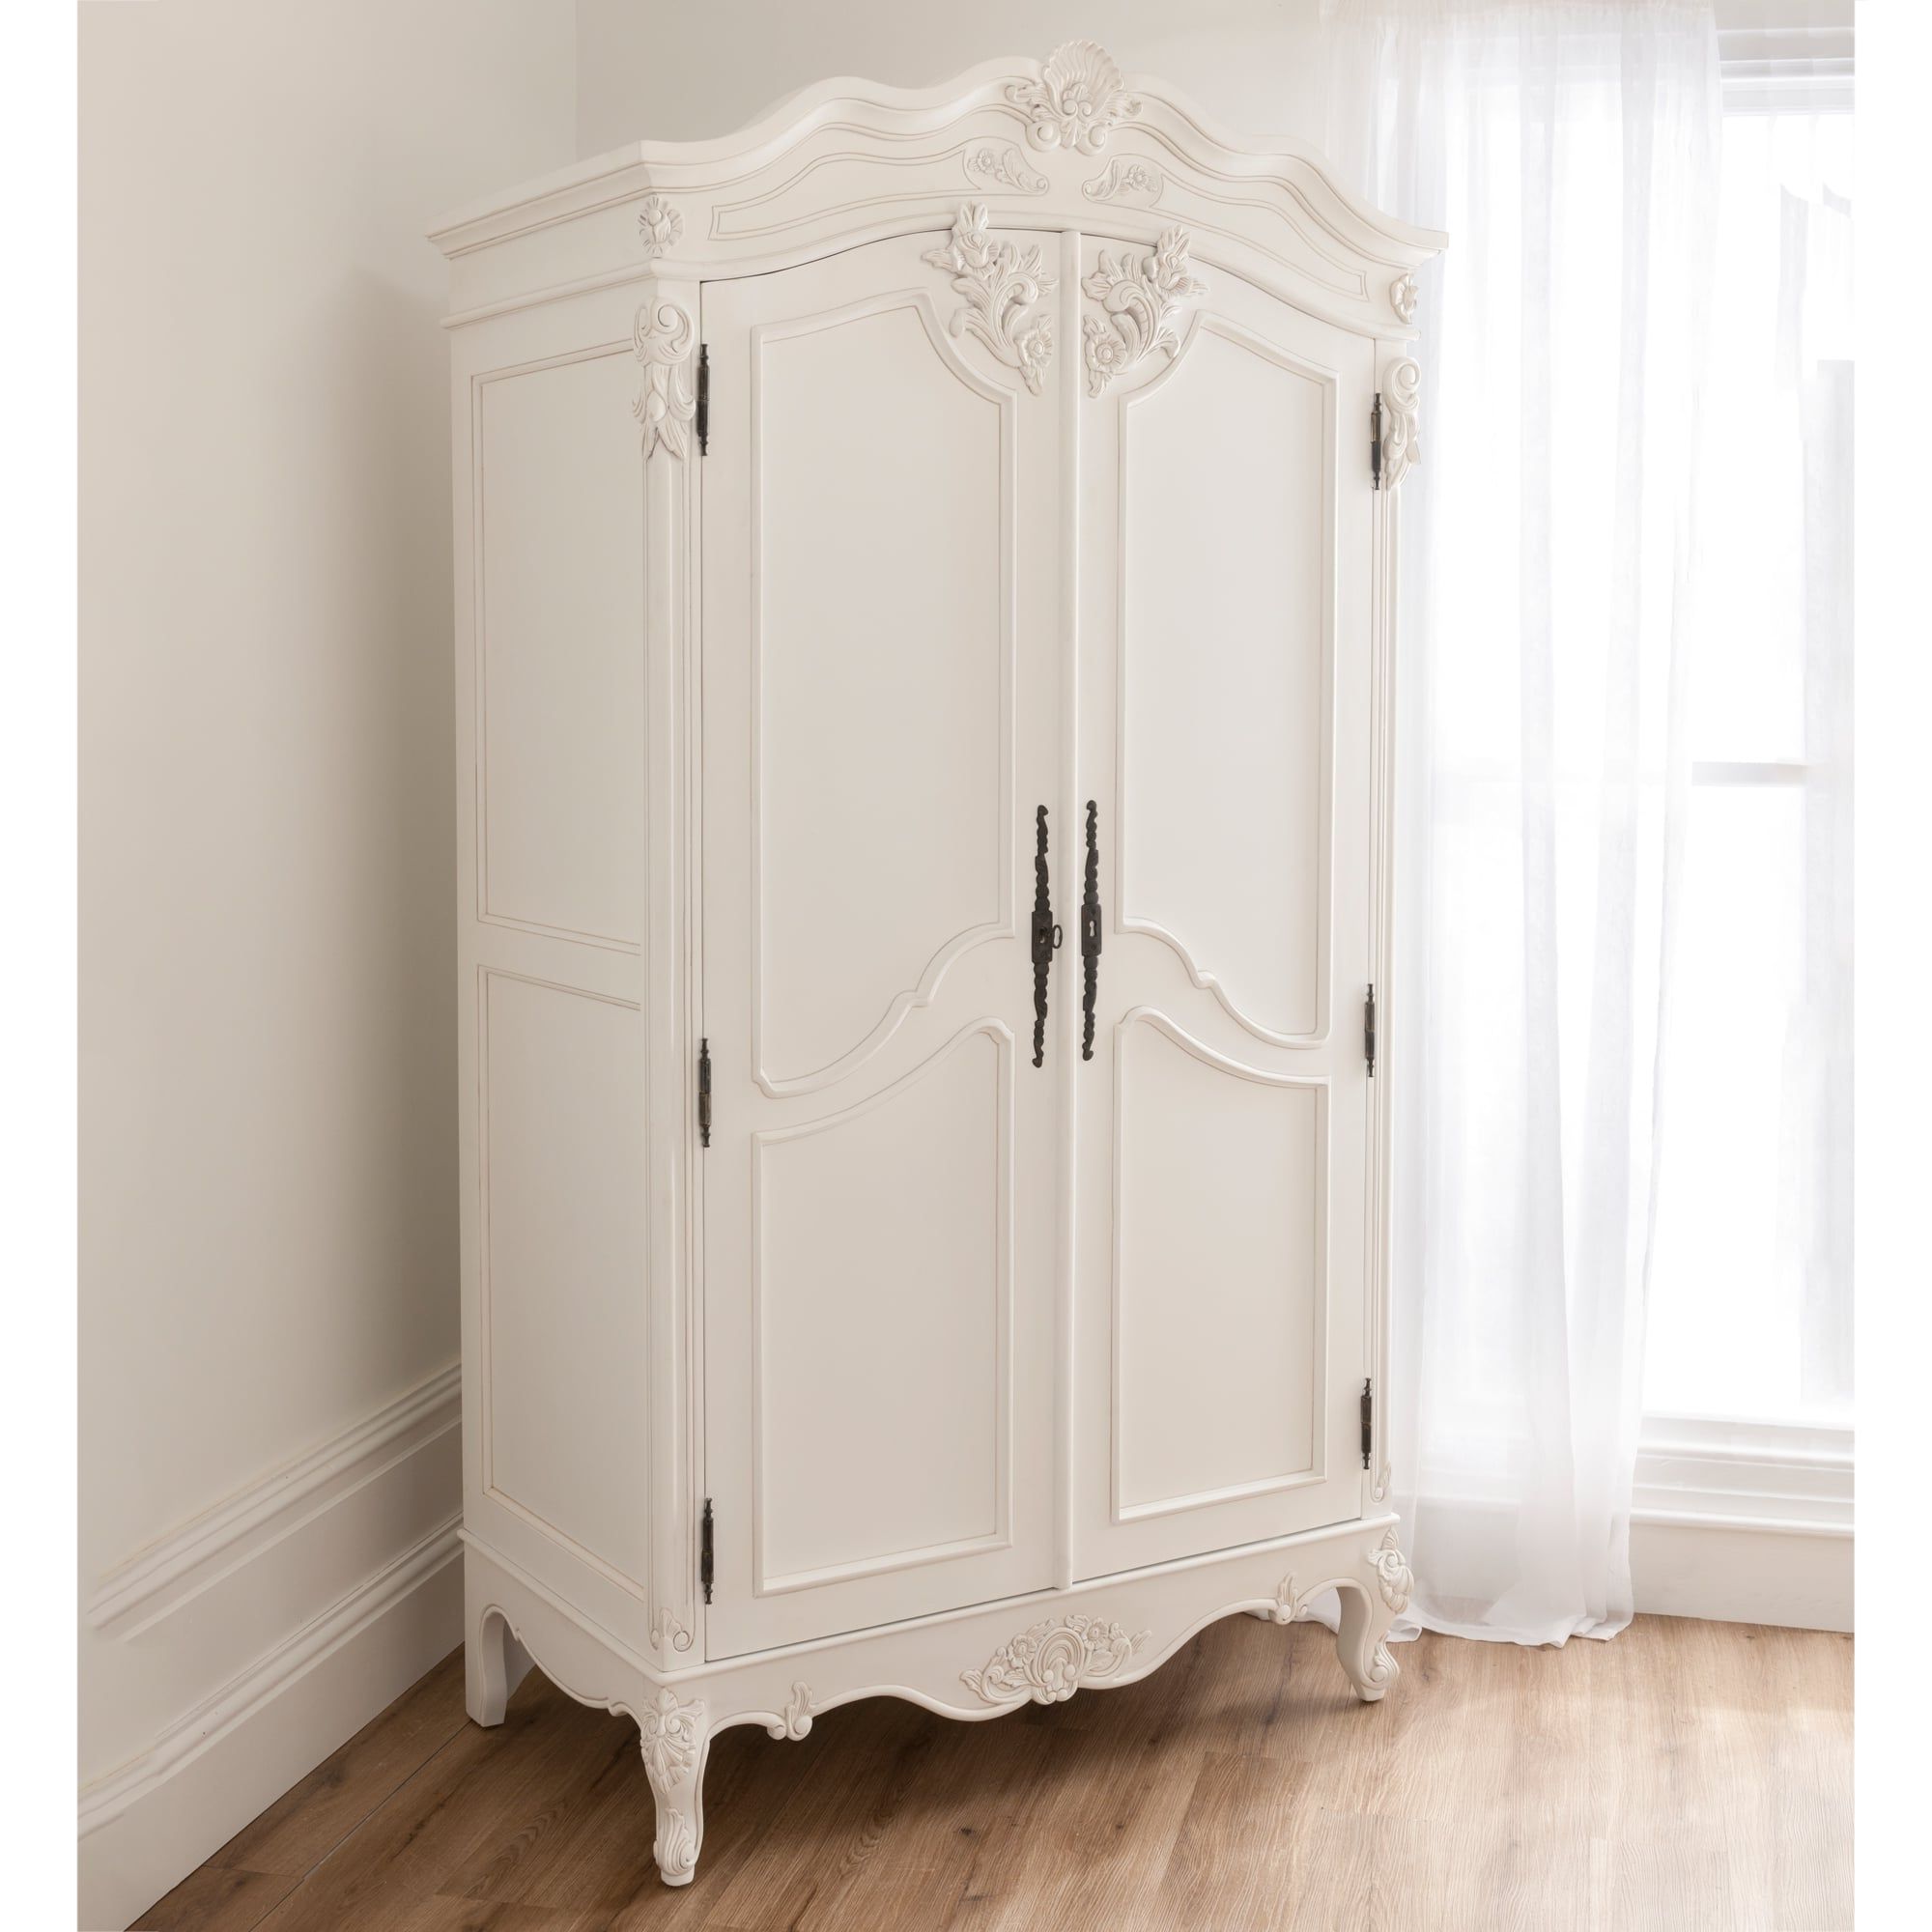 Baroque Antique French Wardrobe Is Available Online At Homesdirect365 For French Armoires Wardrobes (Gallery 5 of 20)